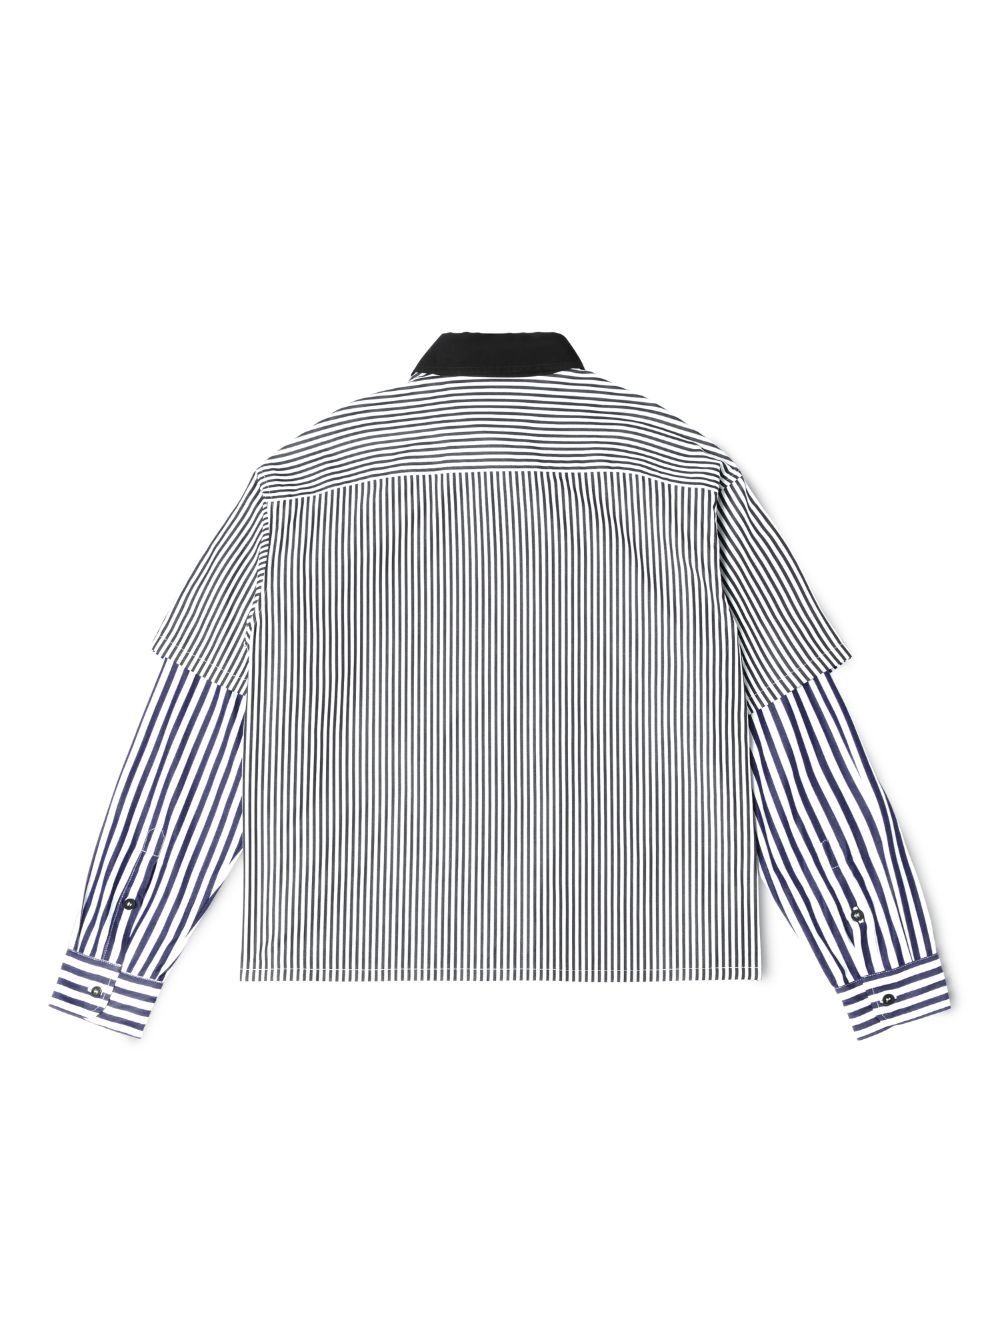 Doublesleeves Stripes Shirt - 6